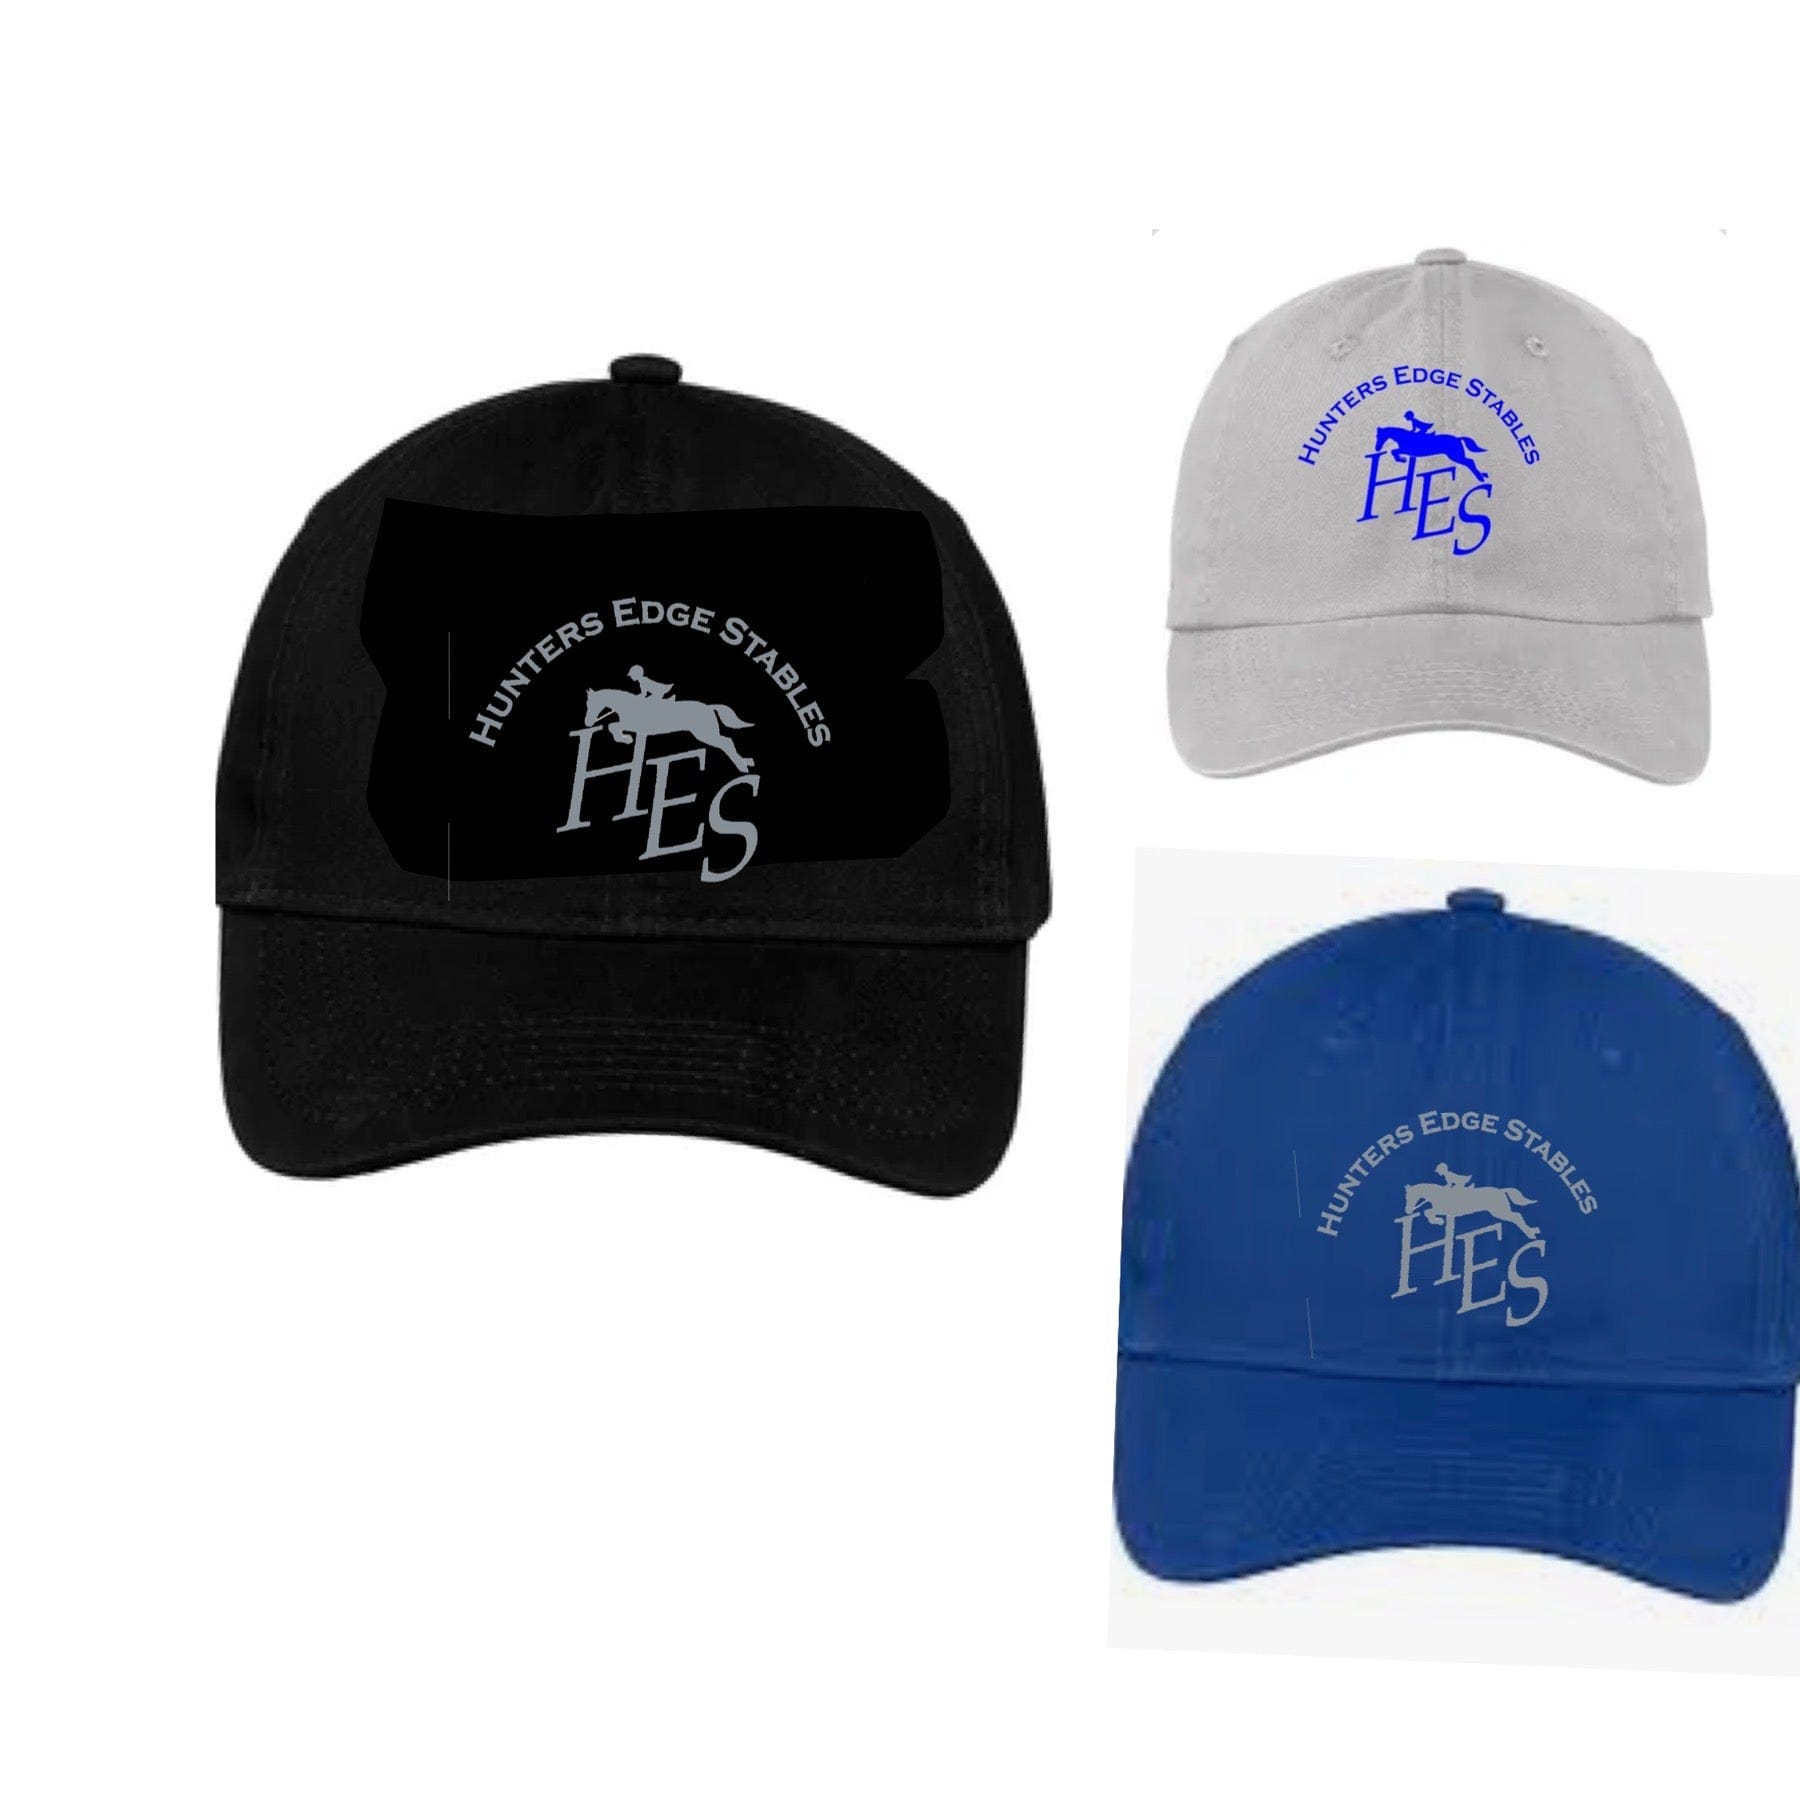 Equestrian Team Apparel Hunters Edge Stables Baseball Cap equestrian team apparel online tack store mobile tack store custom farm apparel custom show stable clothing equestrian lifestyle horse show clothing riding clothes horses equestrian tack store